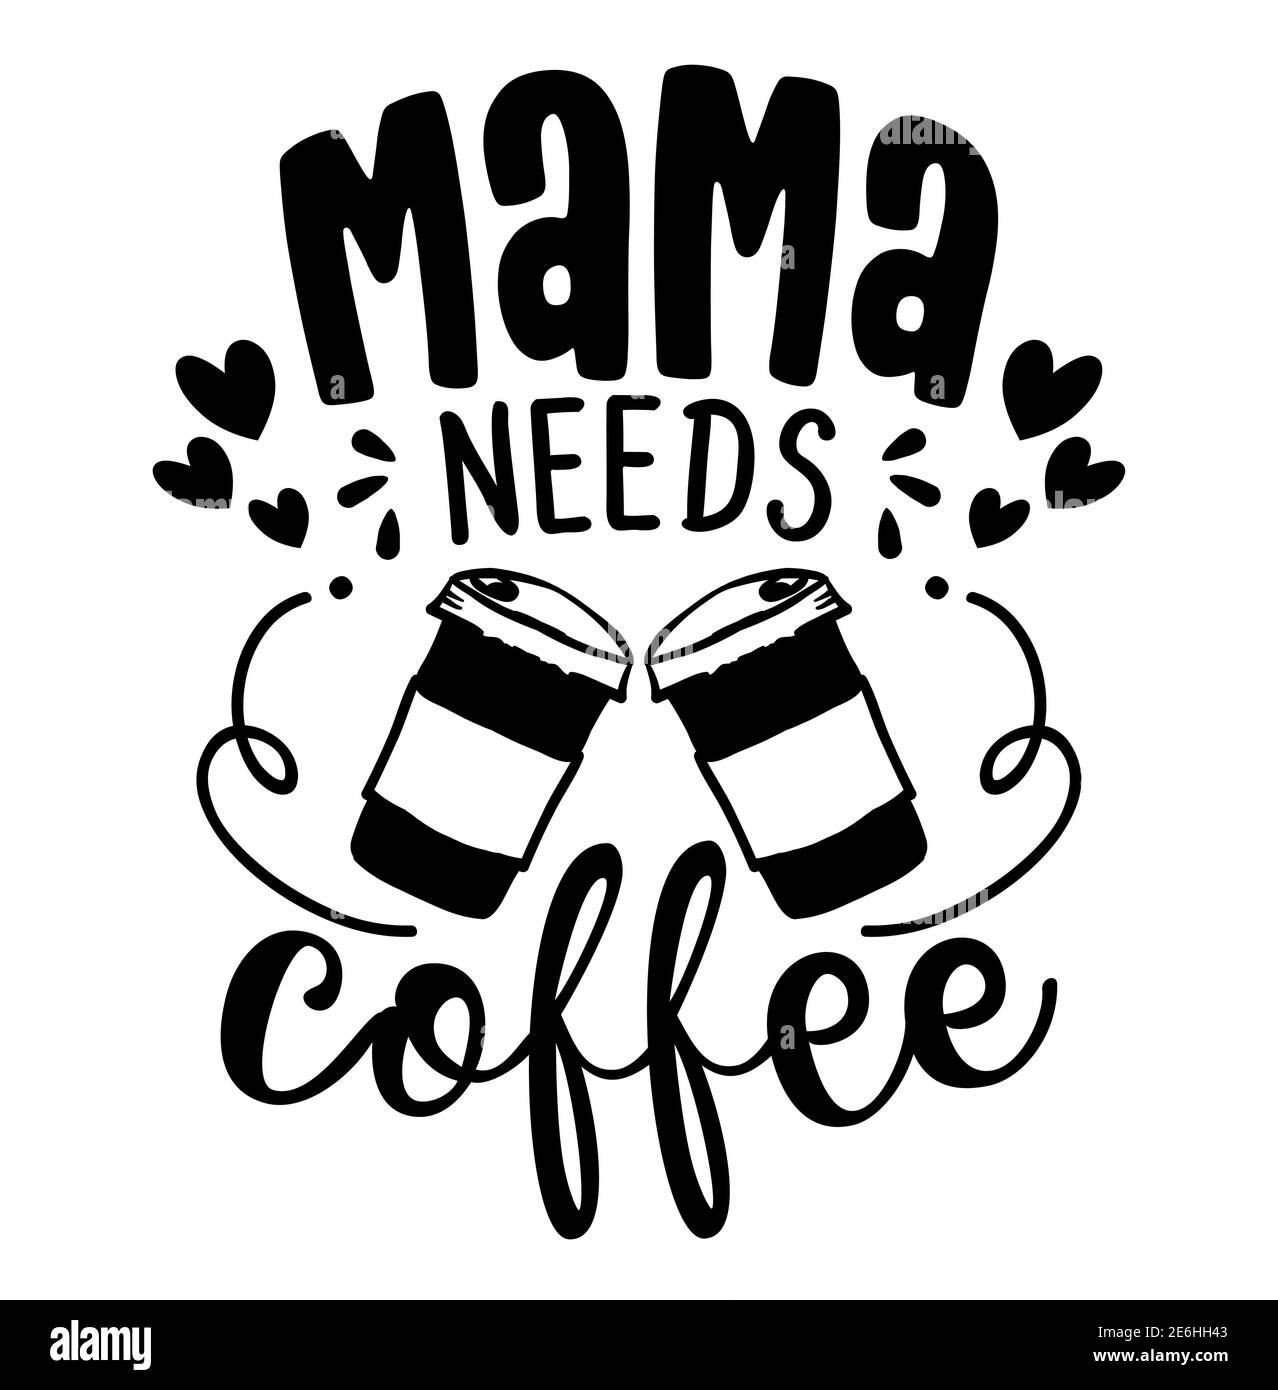 https://c8.alamy.com/comp/2E6HH43/mama-needs-coffee-concept-with-coffee-cup-motivational-poster-or-gift-for-mothers-day-good-for-scrap-booking-motivation-posters-textiles-gifts-2E6HH43.jpg